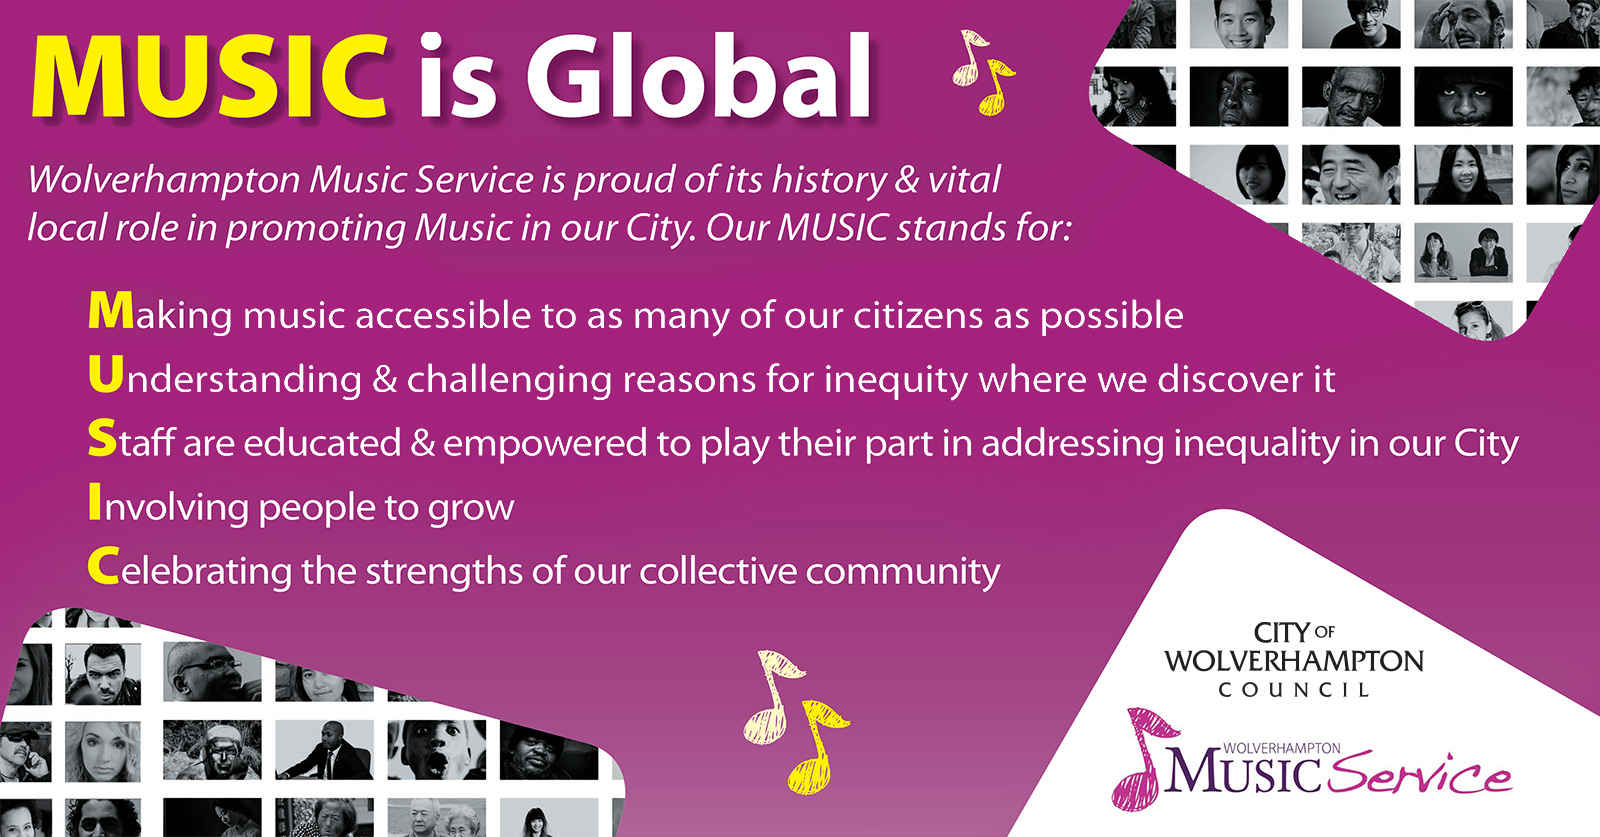 MUSIC is Global Wolverhampton Music Service is proud of its history & vital local role in promoting Music in our City. Our MUSIC stands for: Making music accessible to as many of our citizens as possible Understanding & challenging reasons for inequity where we discover it Staff are educated & empowered to play their part in addressing inequality in our City Involving people to grow Celebrating the strengths of our collective community